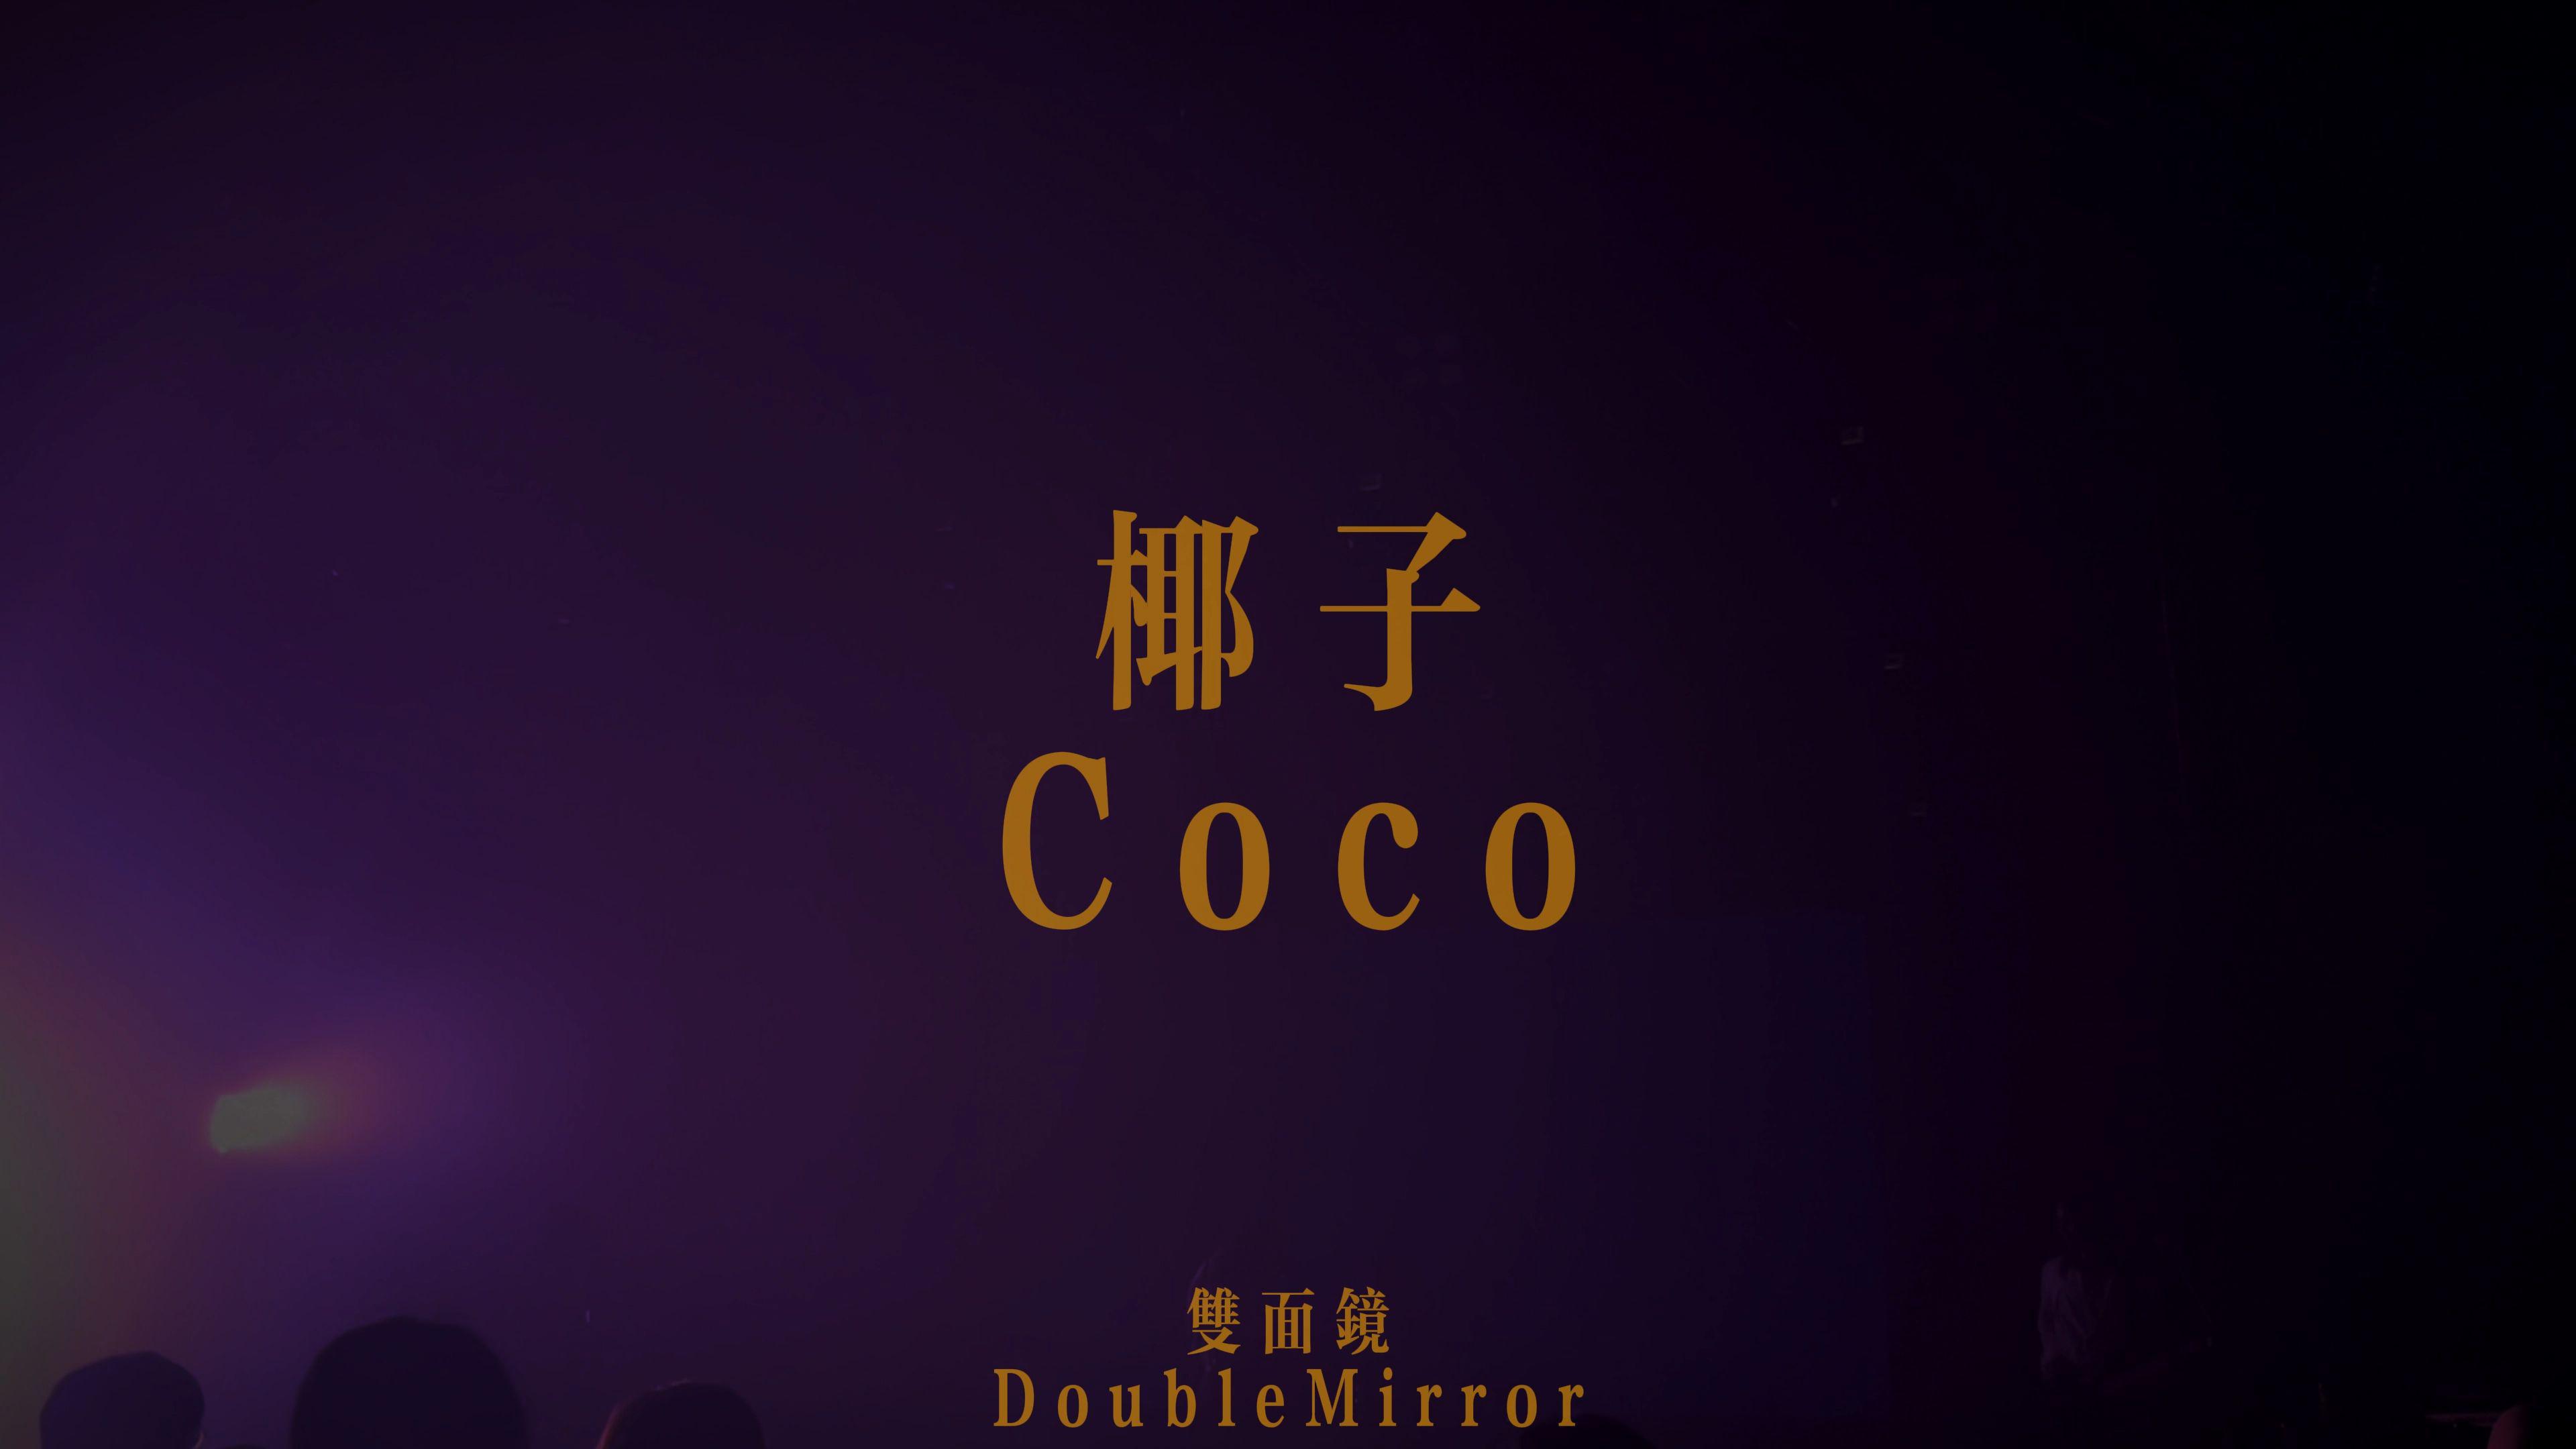 DoubleMirror双面镜 - 椰子（Coco）|Offical Live Video|DoubleMirror双面镜